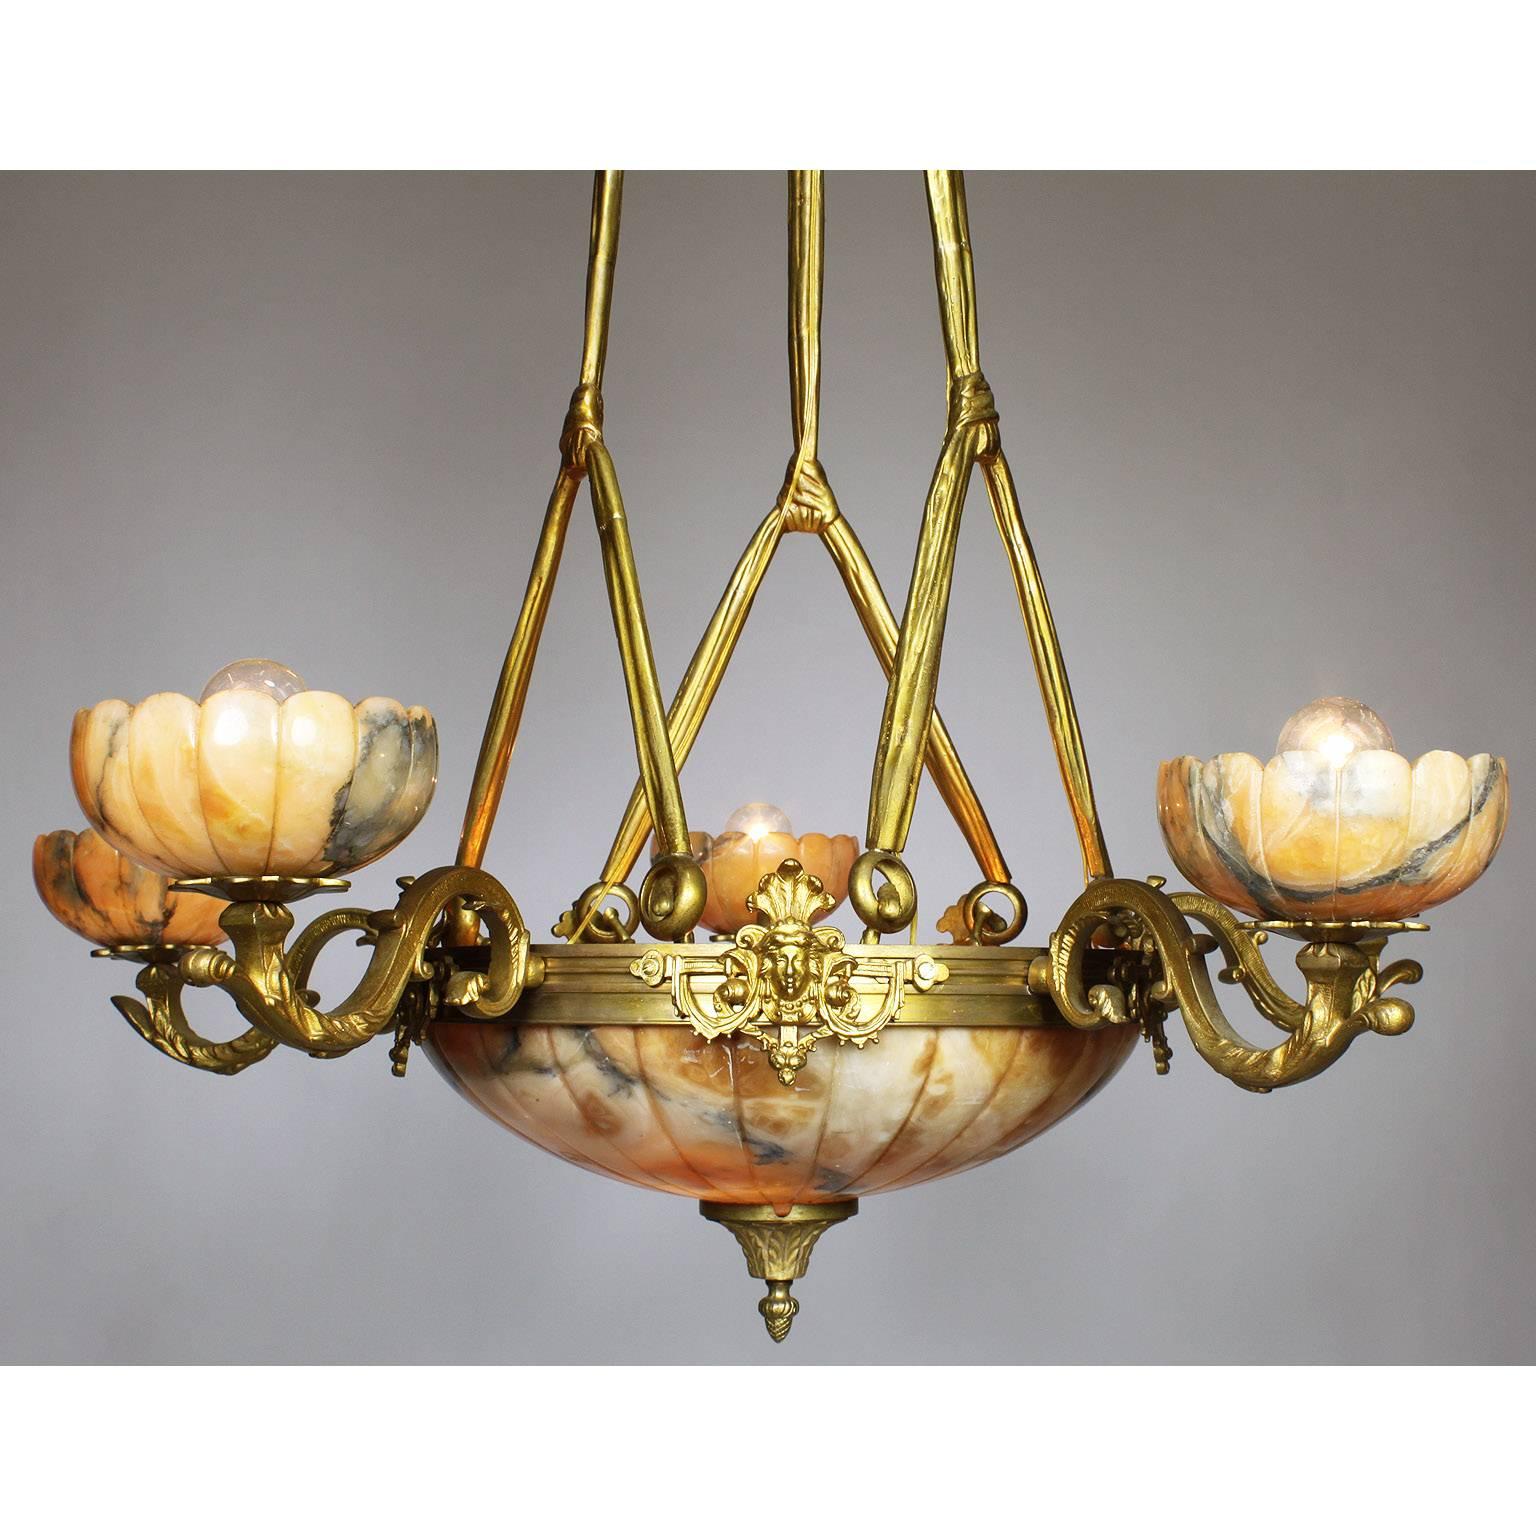 A French 20th century Art-Deco style gilt bronze and caramel-colored carved alabaster five-light chandelier. The circular banded bronze frame surmounted female masks and five 